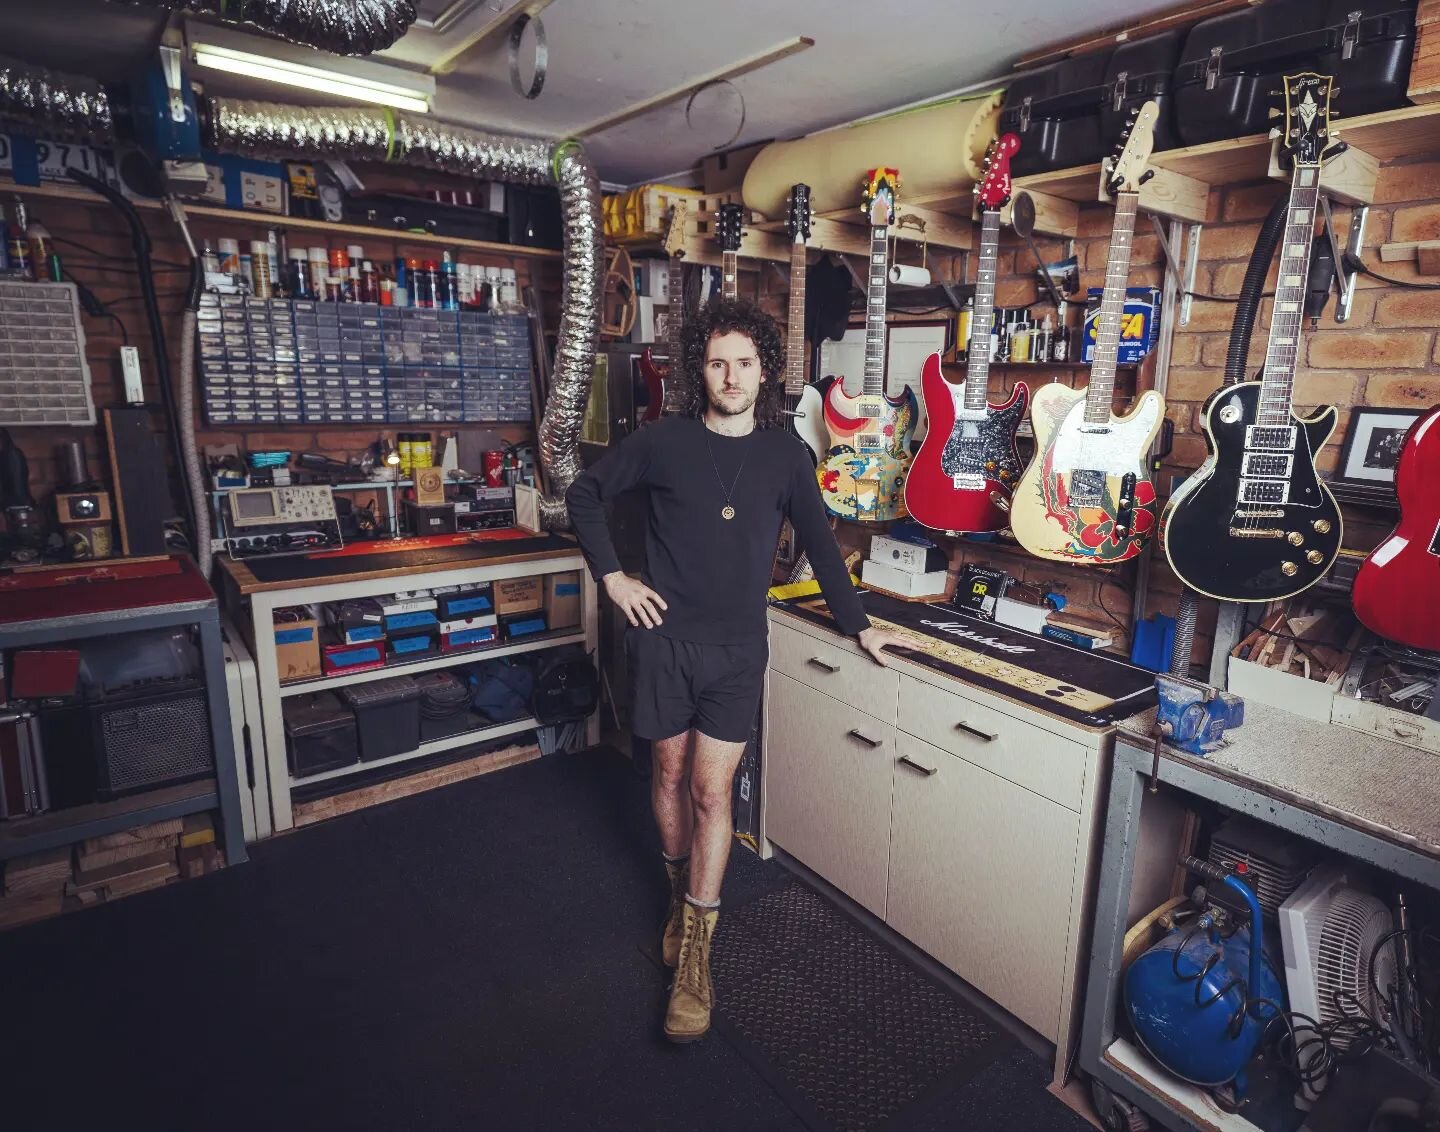 Die Hard with a Vengeance 👊
.
Been flat out over New Years getting everything finished off to hit the Stratosphere in 2022! 🚀
.
📷 @hitmeupcreative 
.
#weztech #guitarservicing #guitarshop #guitartech #guitarluthier #fender #gibson #jimmypage #drag